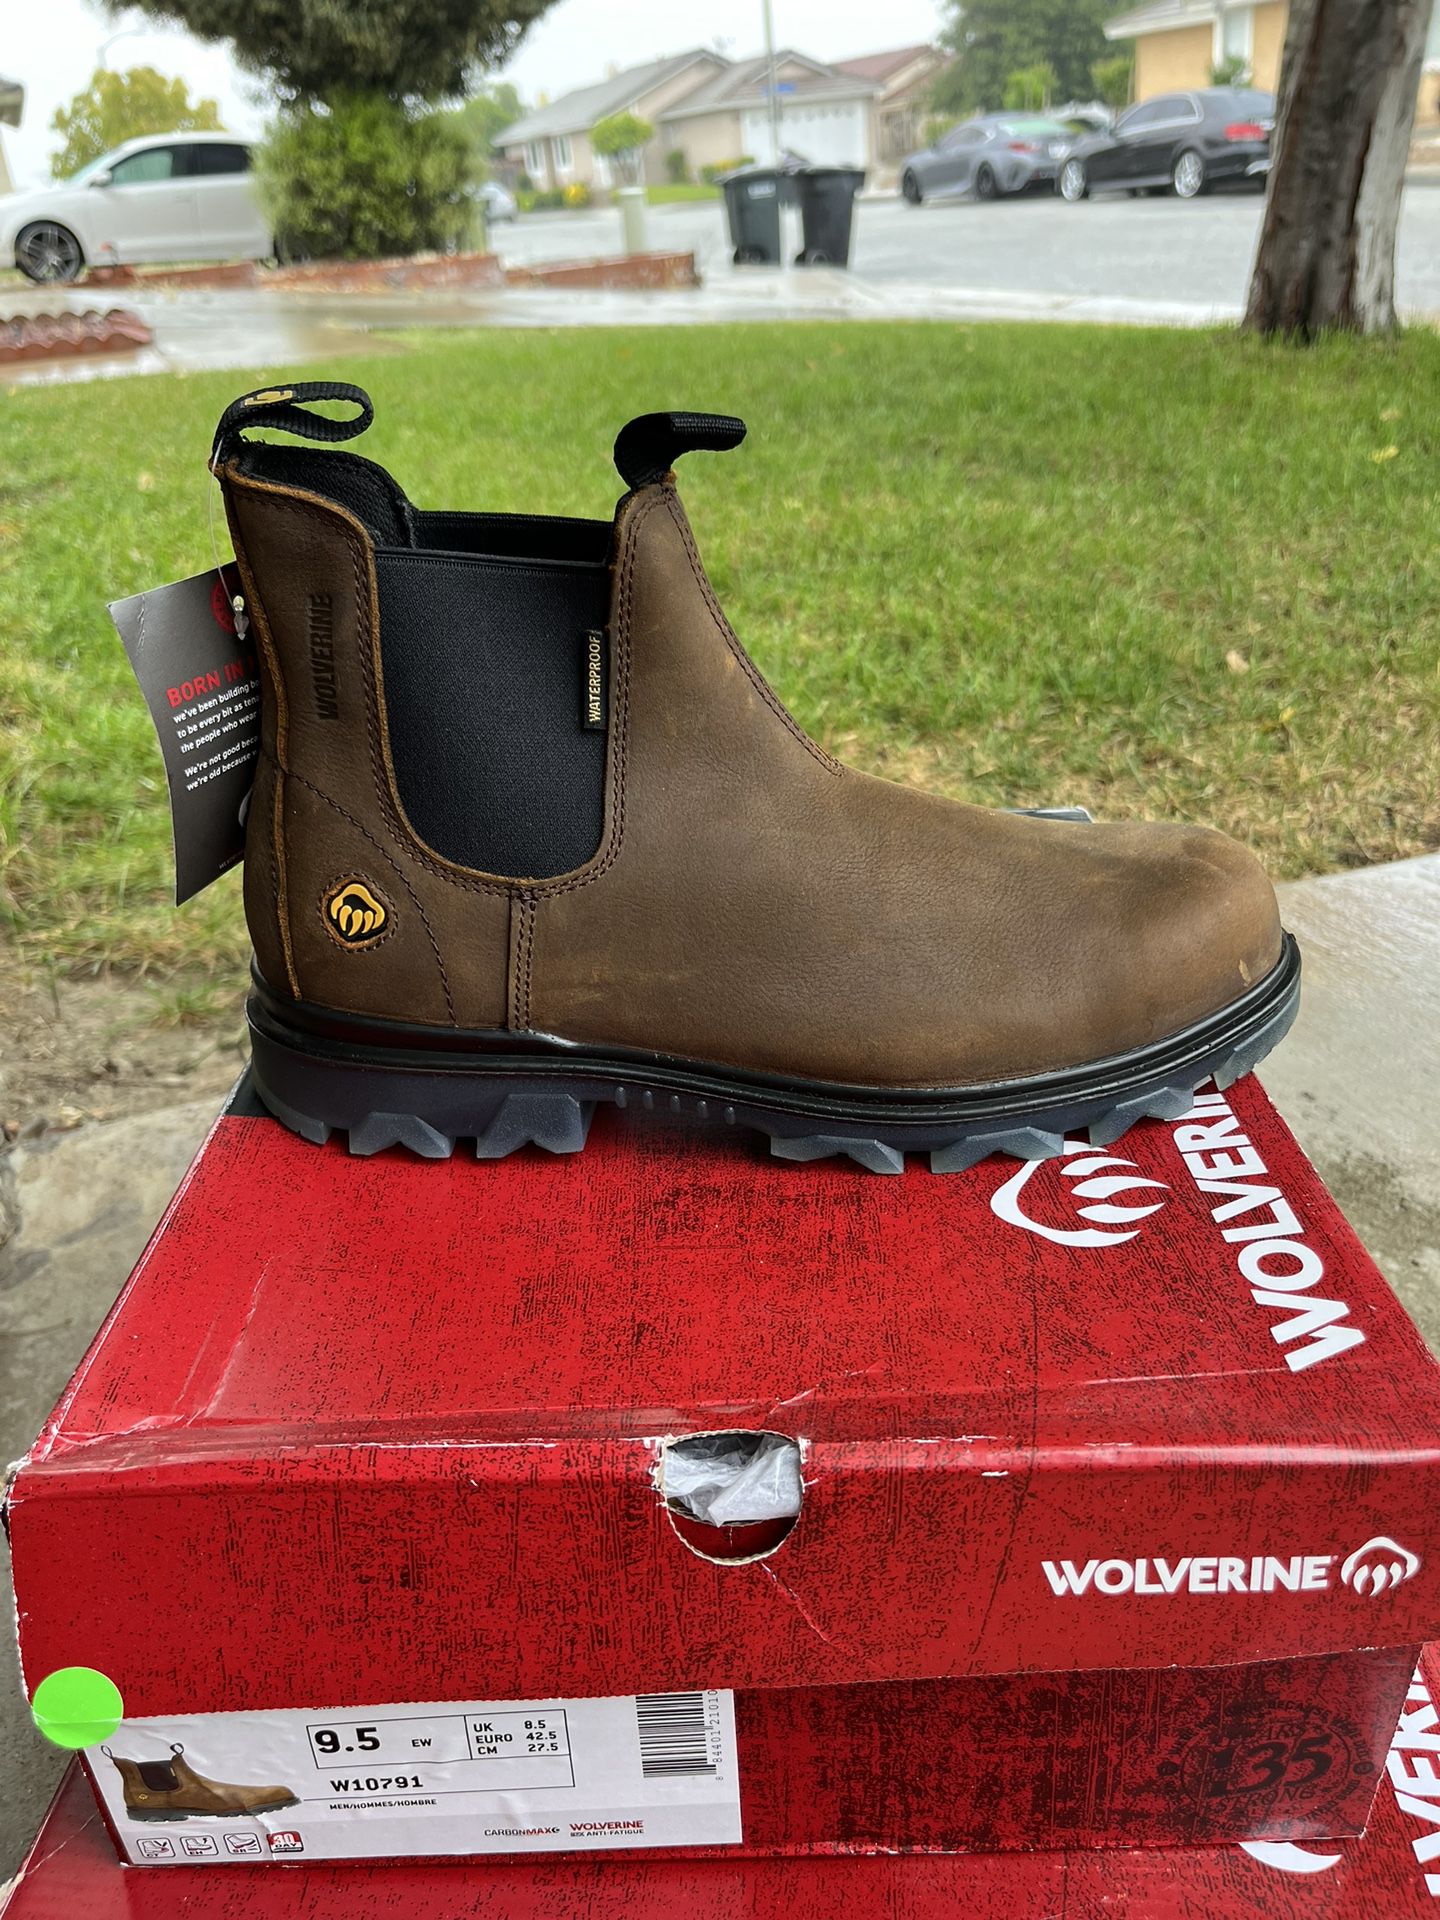 WOLVERINE Boots Steel Toe Waterproof Size 8 9.5 And 10